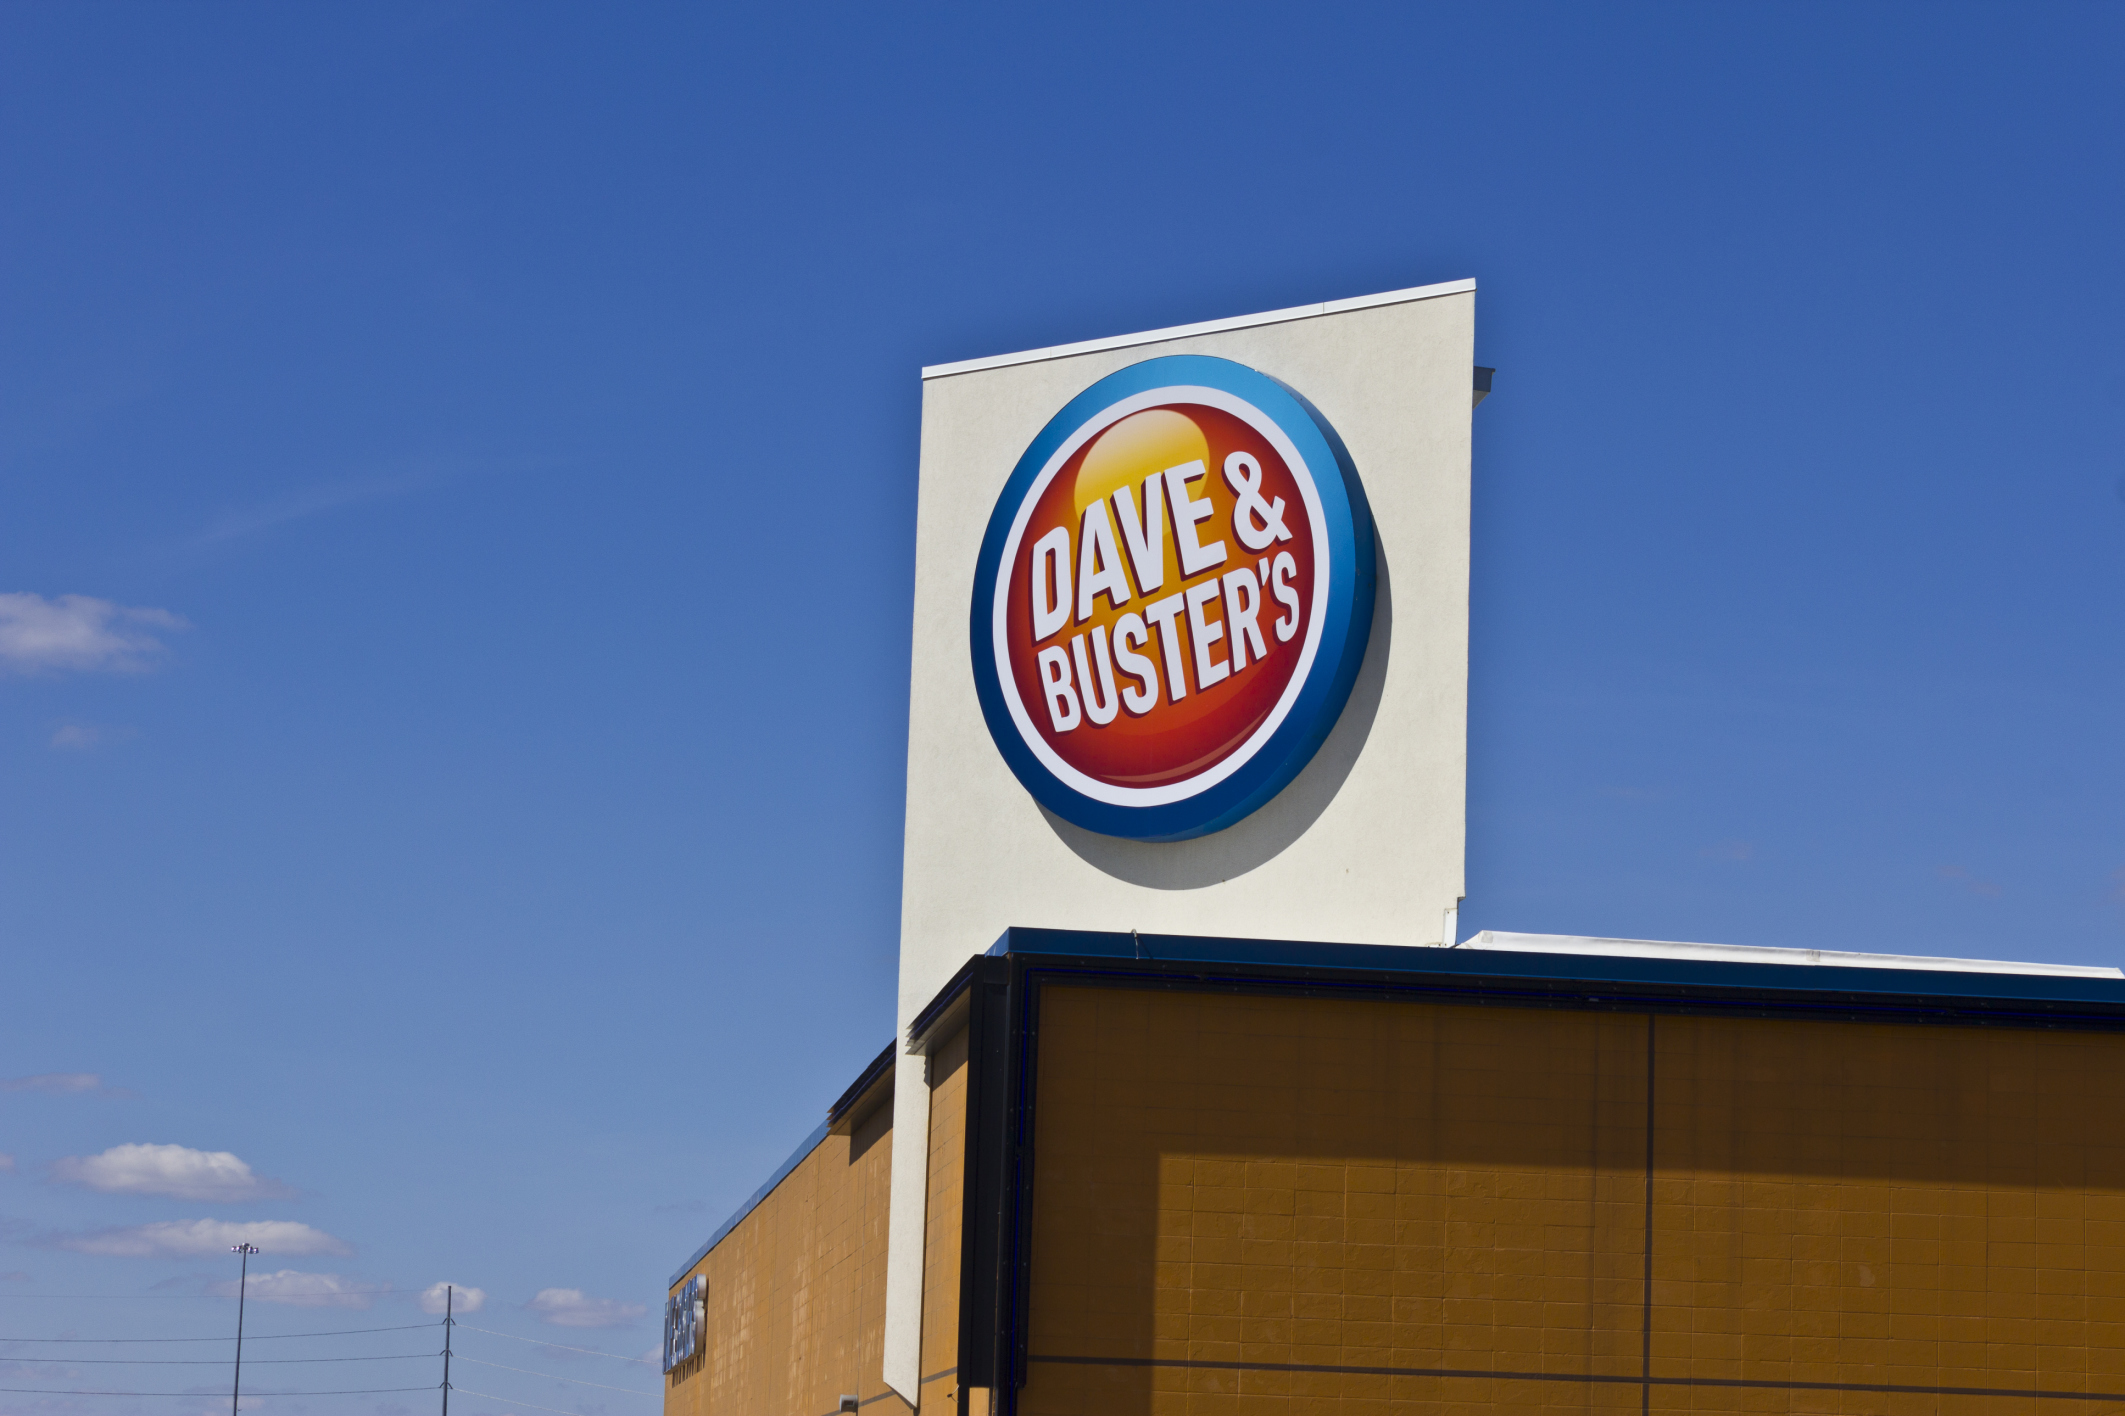 Want a Dave & Buster’s job? Plenty are coming to Maryland